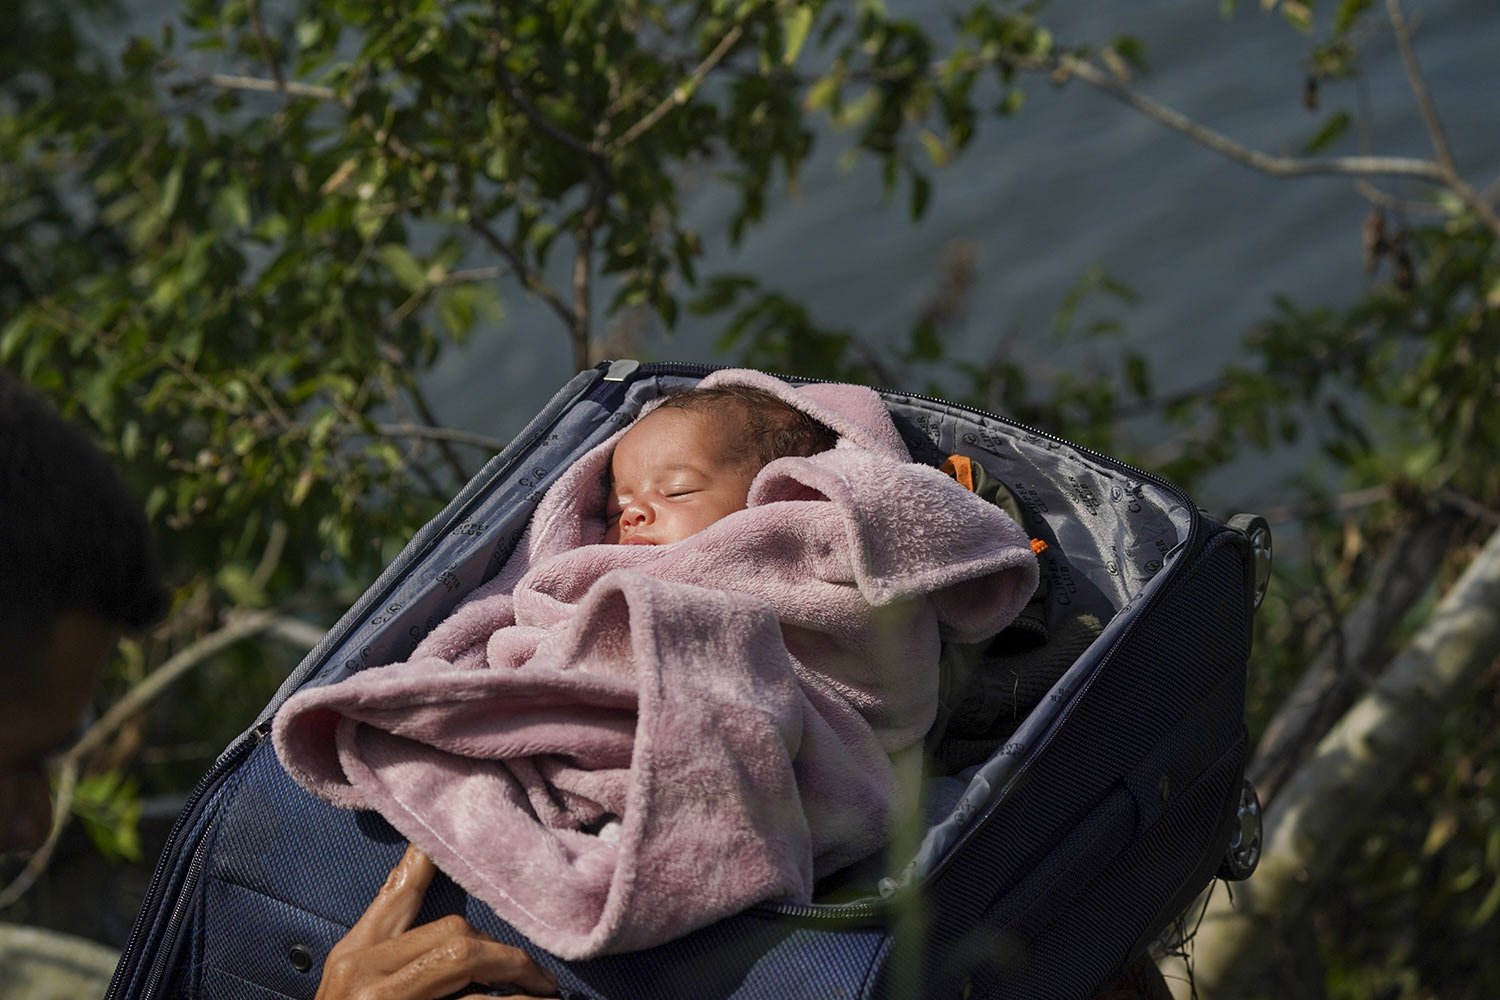  Migrants cross the Rio Grande into the U.S. with a baby in a suitcase, as seen from Matamoros, Mexico, May 10, 2023. (AP Photo/Fernando Llano) 